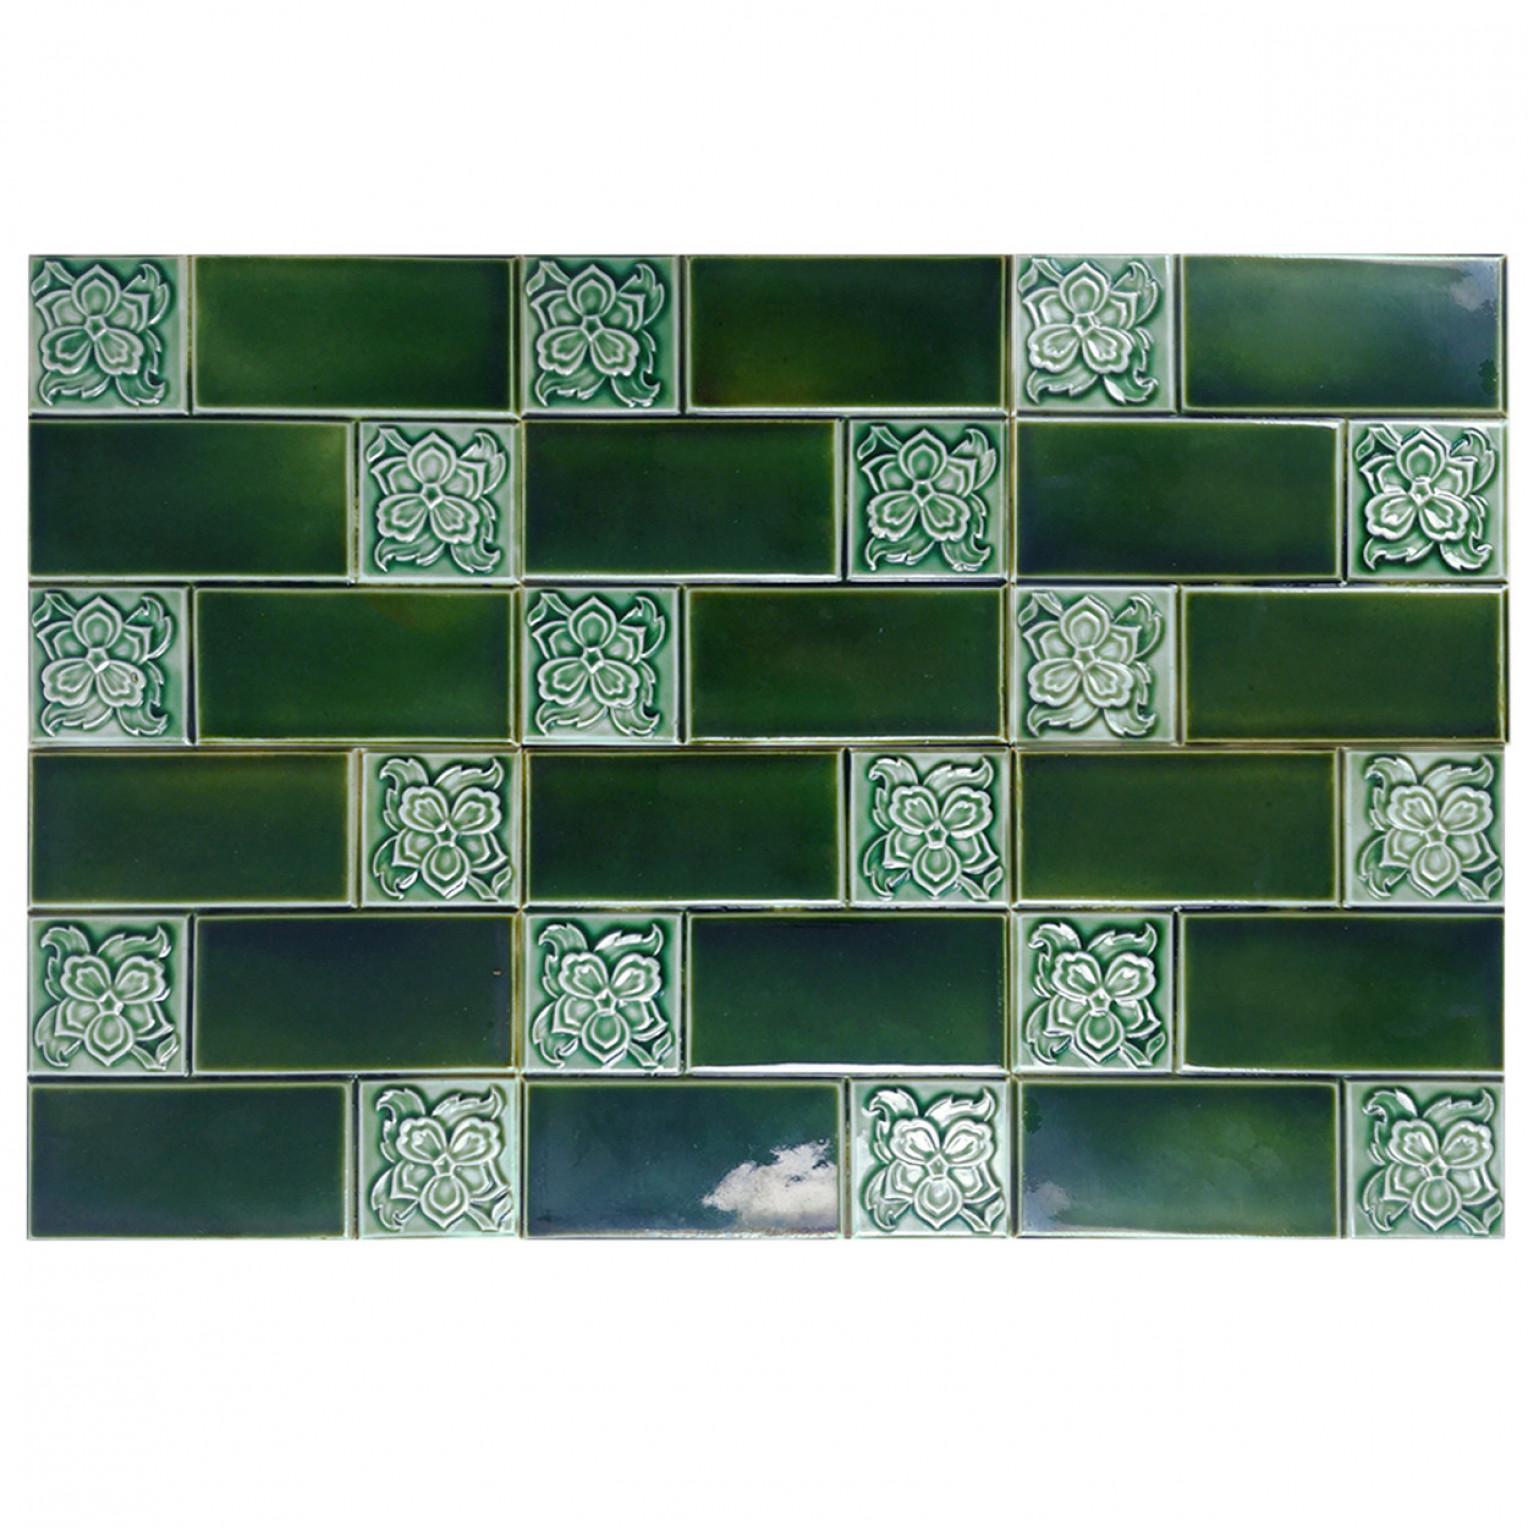 Amazing set of handmade tiles in rich green colors. Each tile is divided into six faces. Manufactured early 20th century, Belgium.
These tiles would be charming displayed on easels, framed or incorporated into a custom tile design.

Please note that